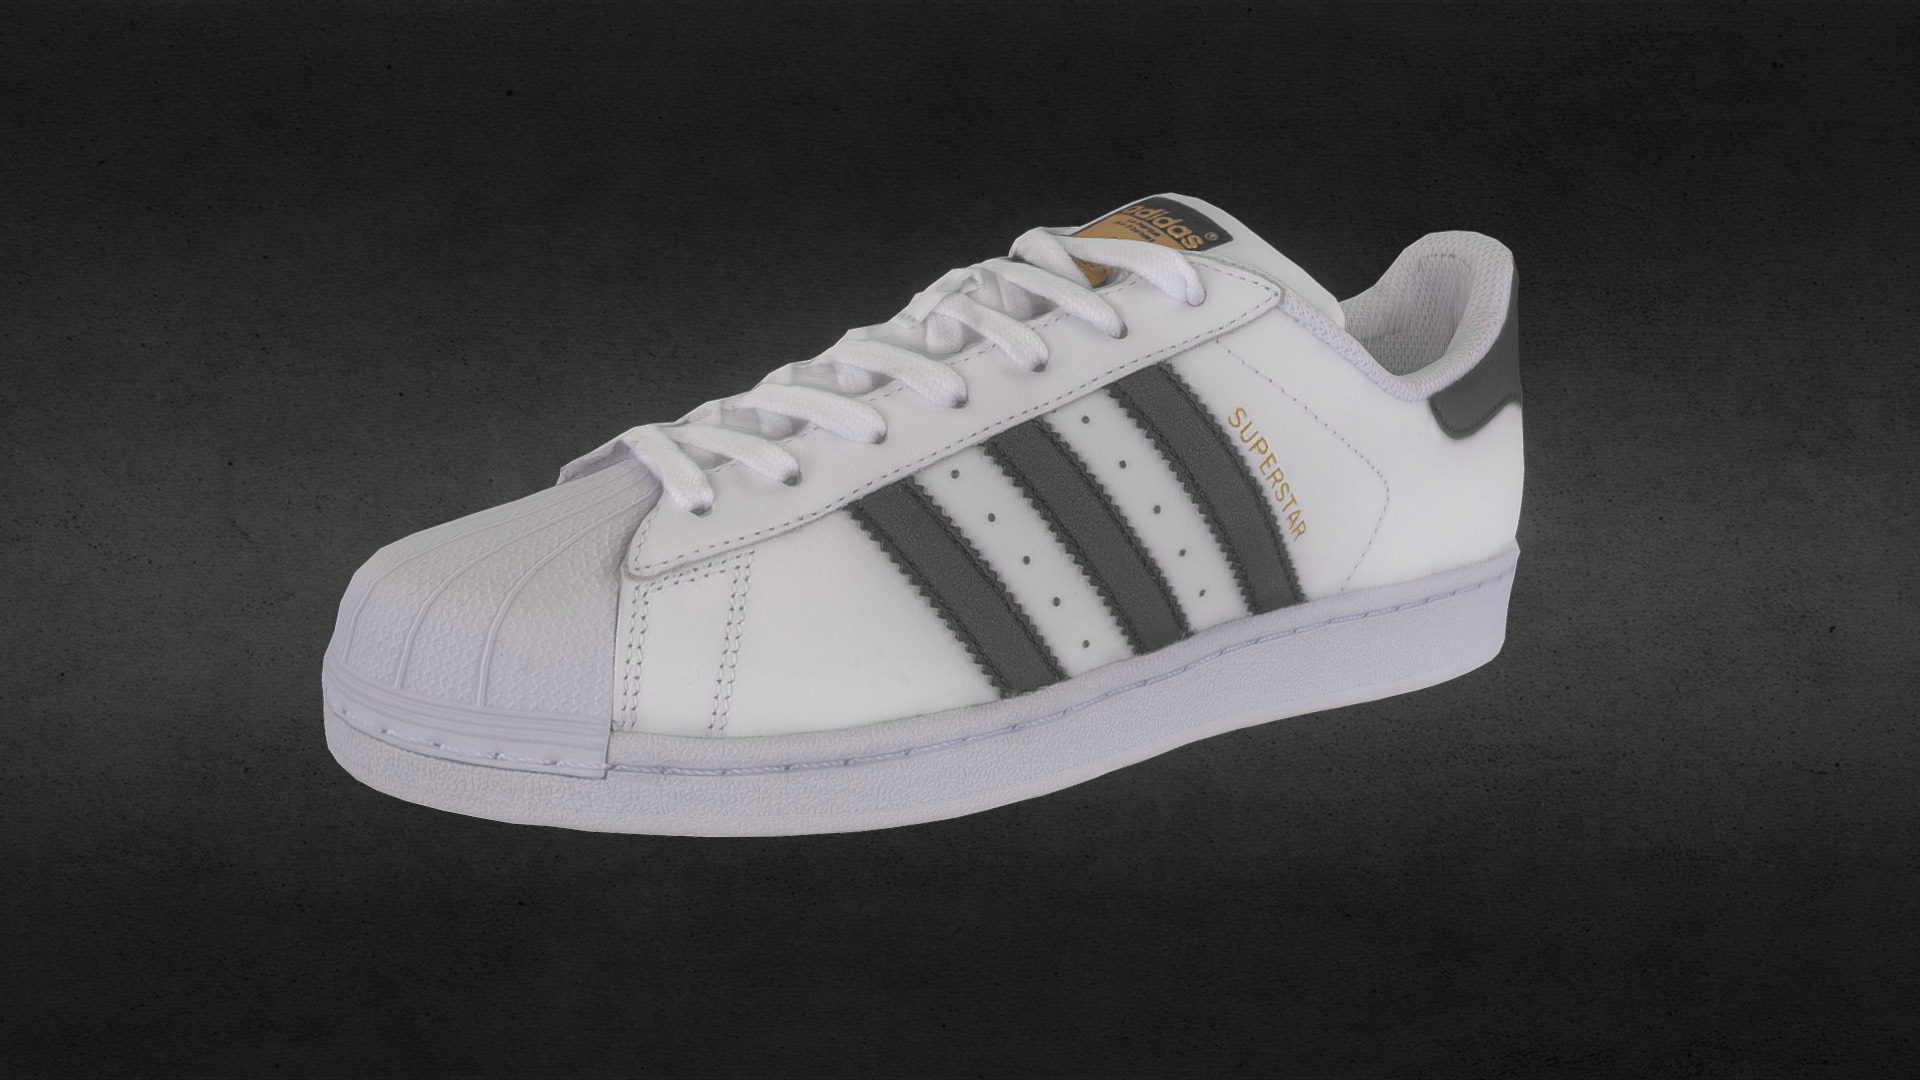 3D model Adidas Superstar Draft 1 - This is a 3D model of the Adidas Superstar Draft 1. The 3D model is about a white and grey shoe.